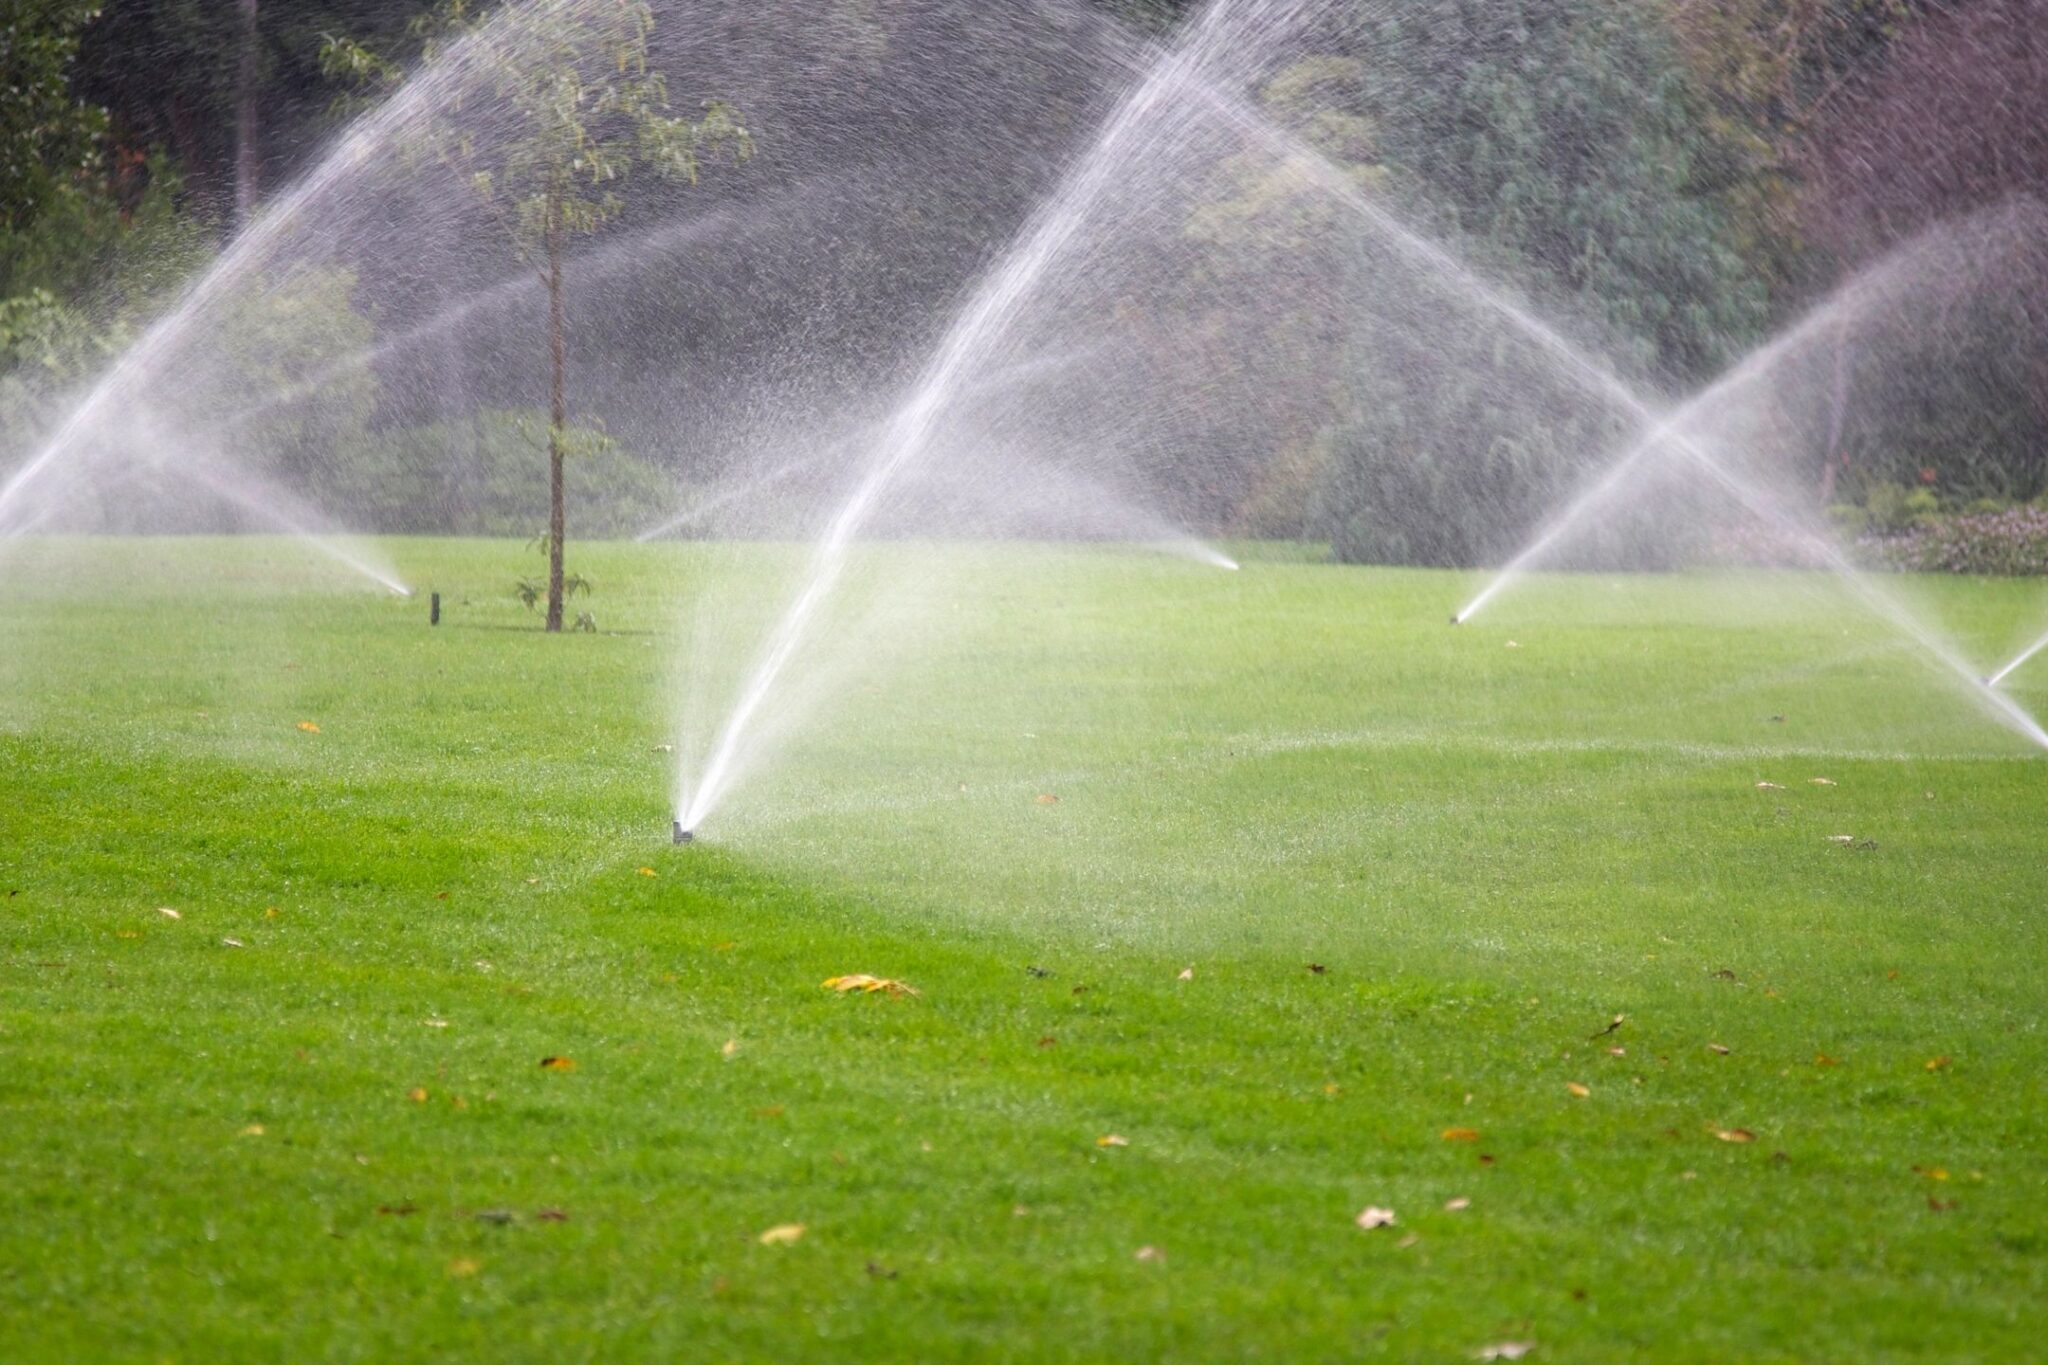 Hopkinton bans outdoor water use, with limited exceptions